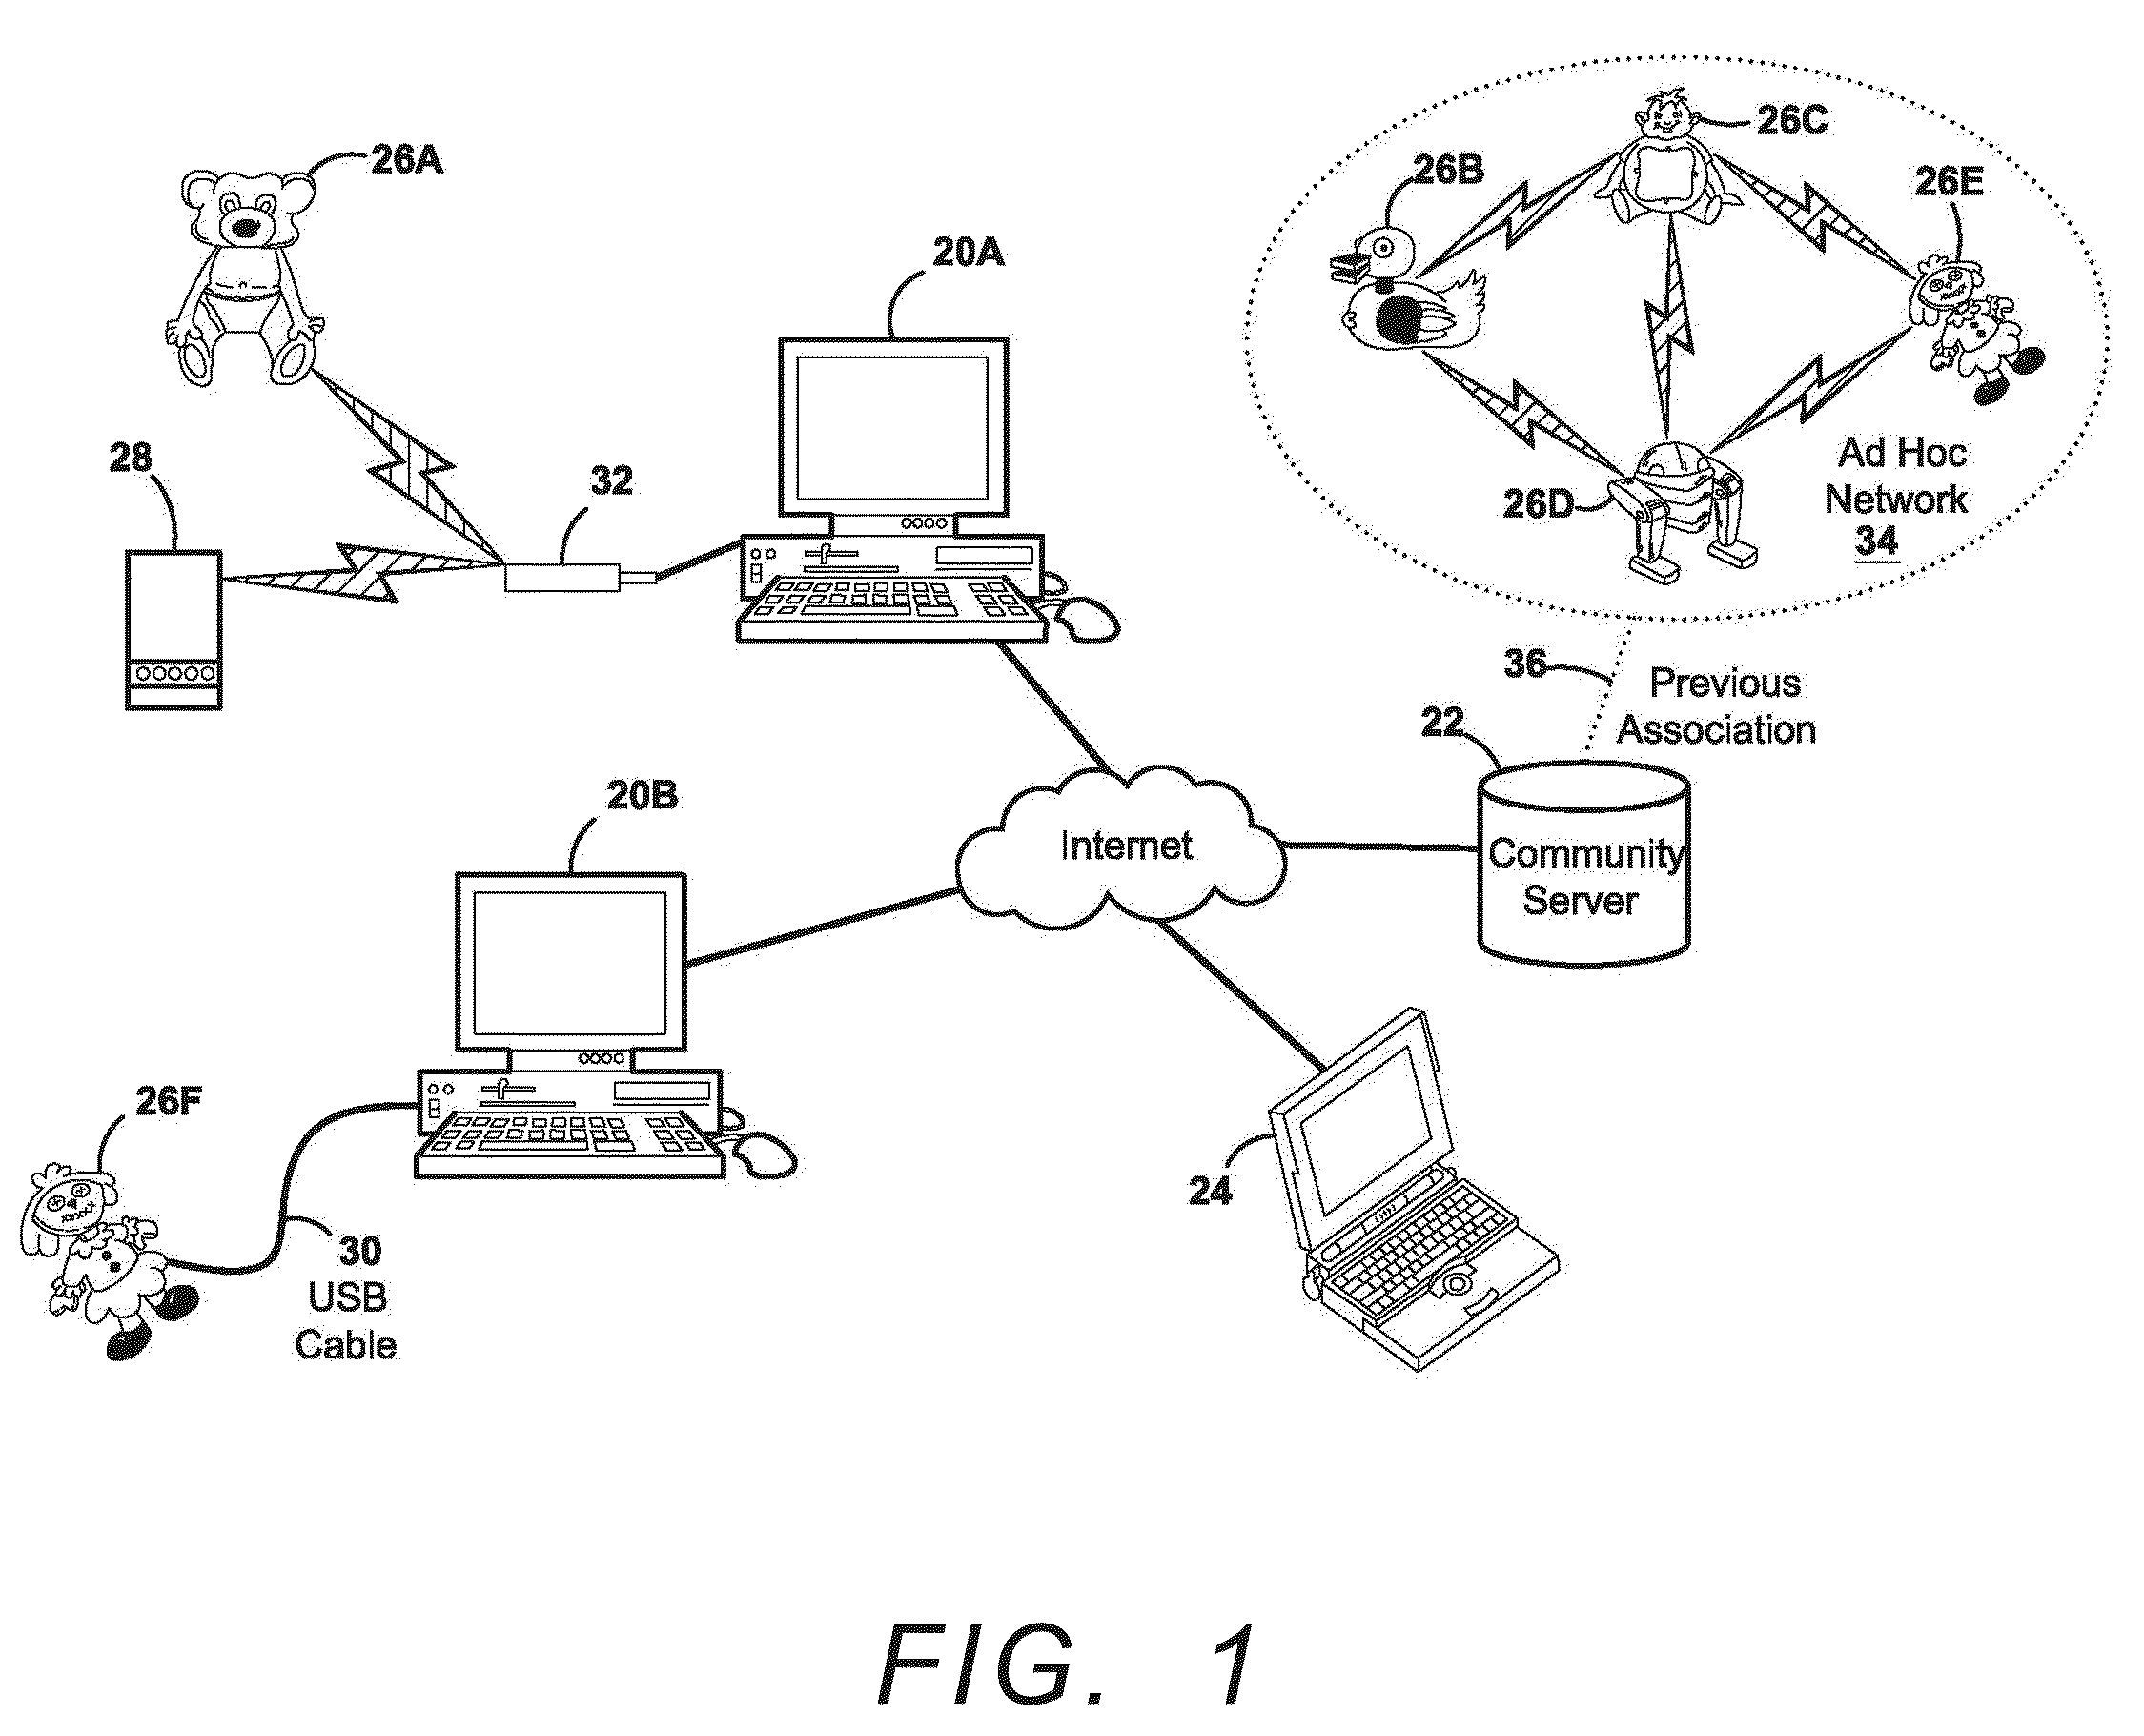 Temporal network server connected devices with off-line ad hoc update and interaction capability